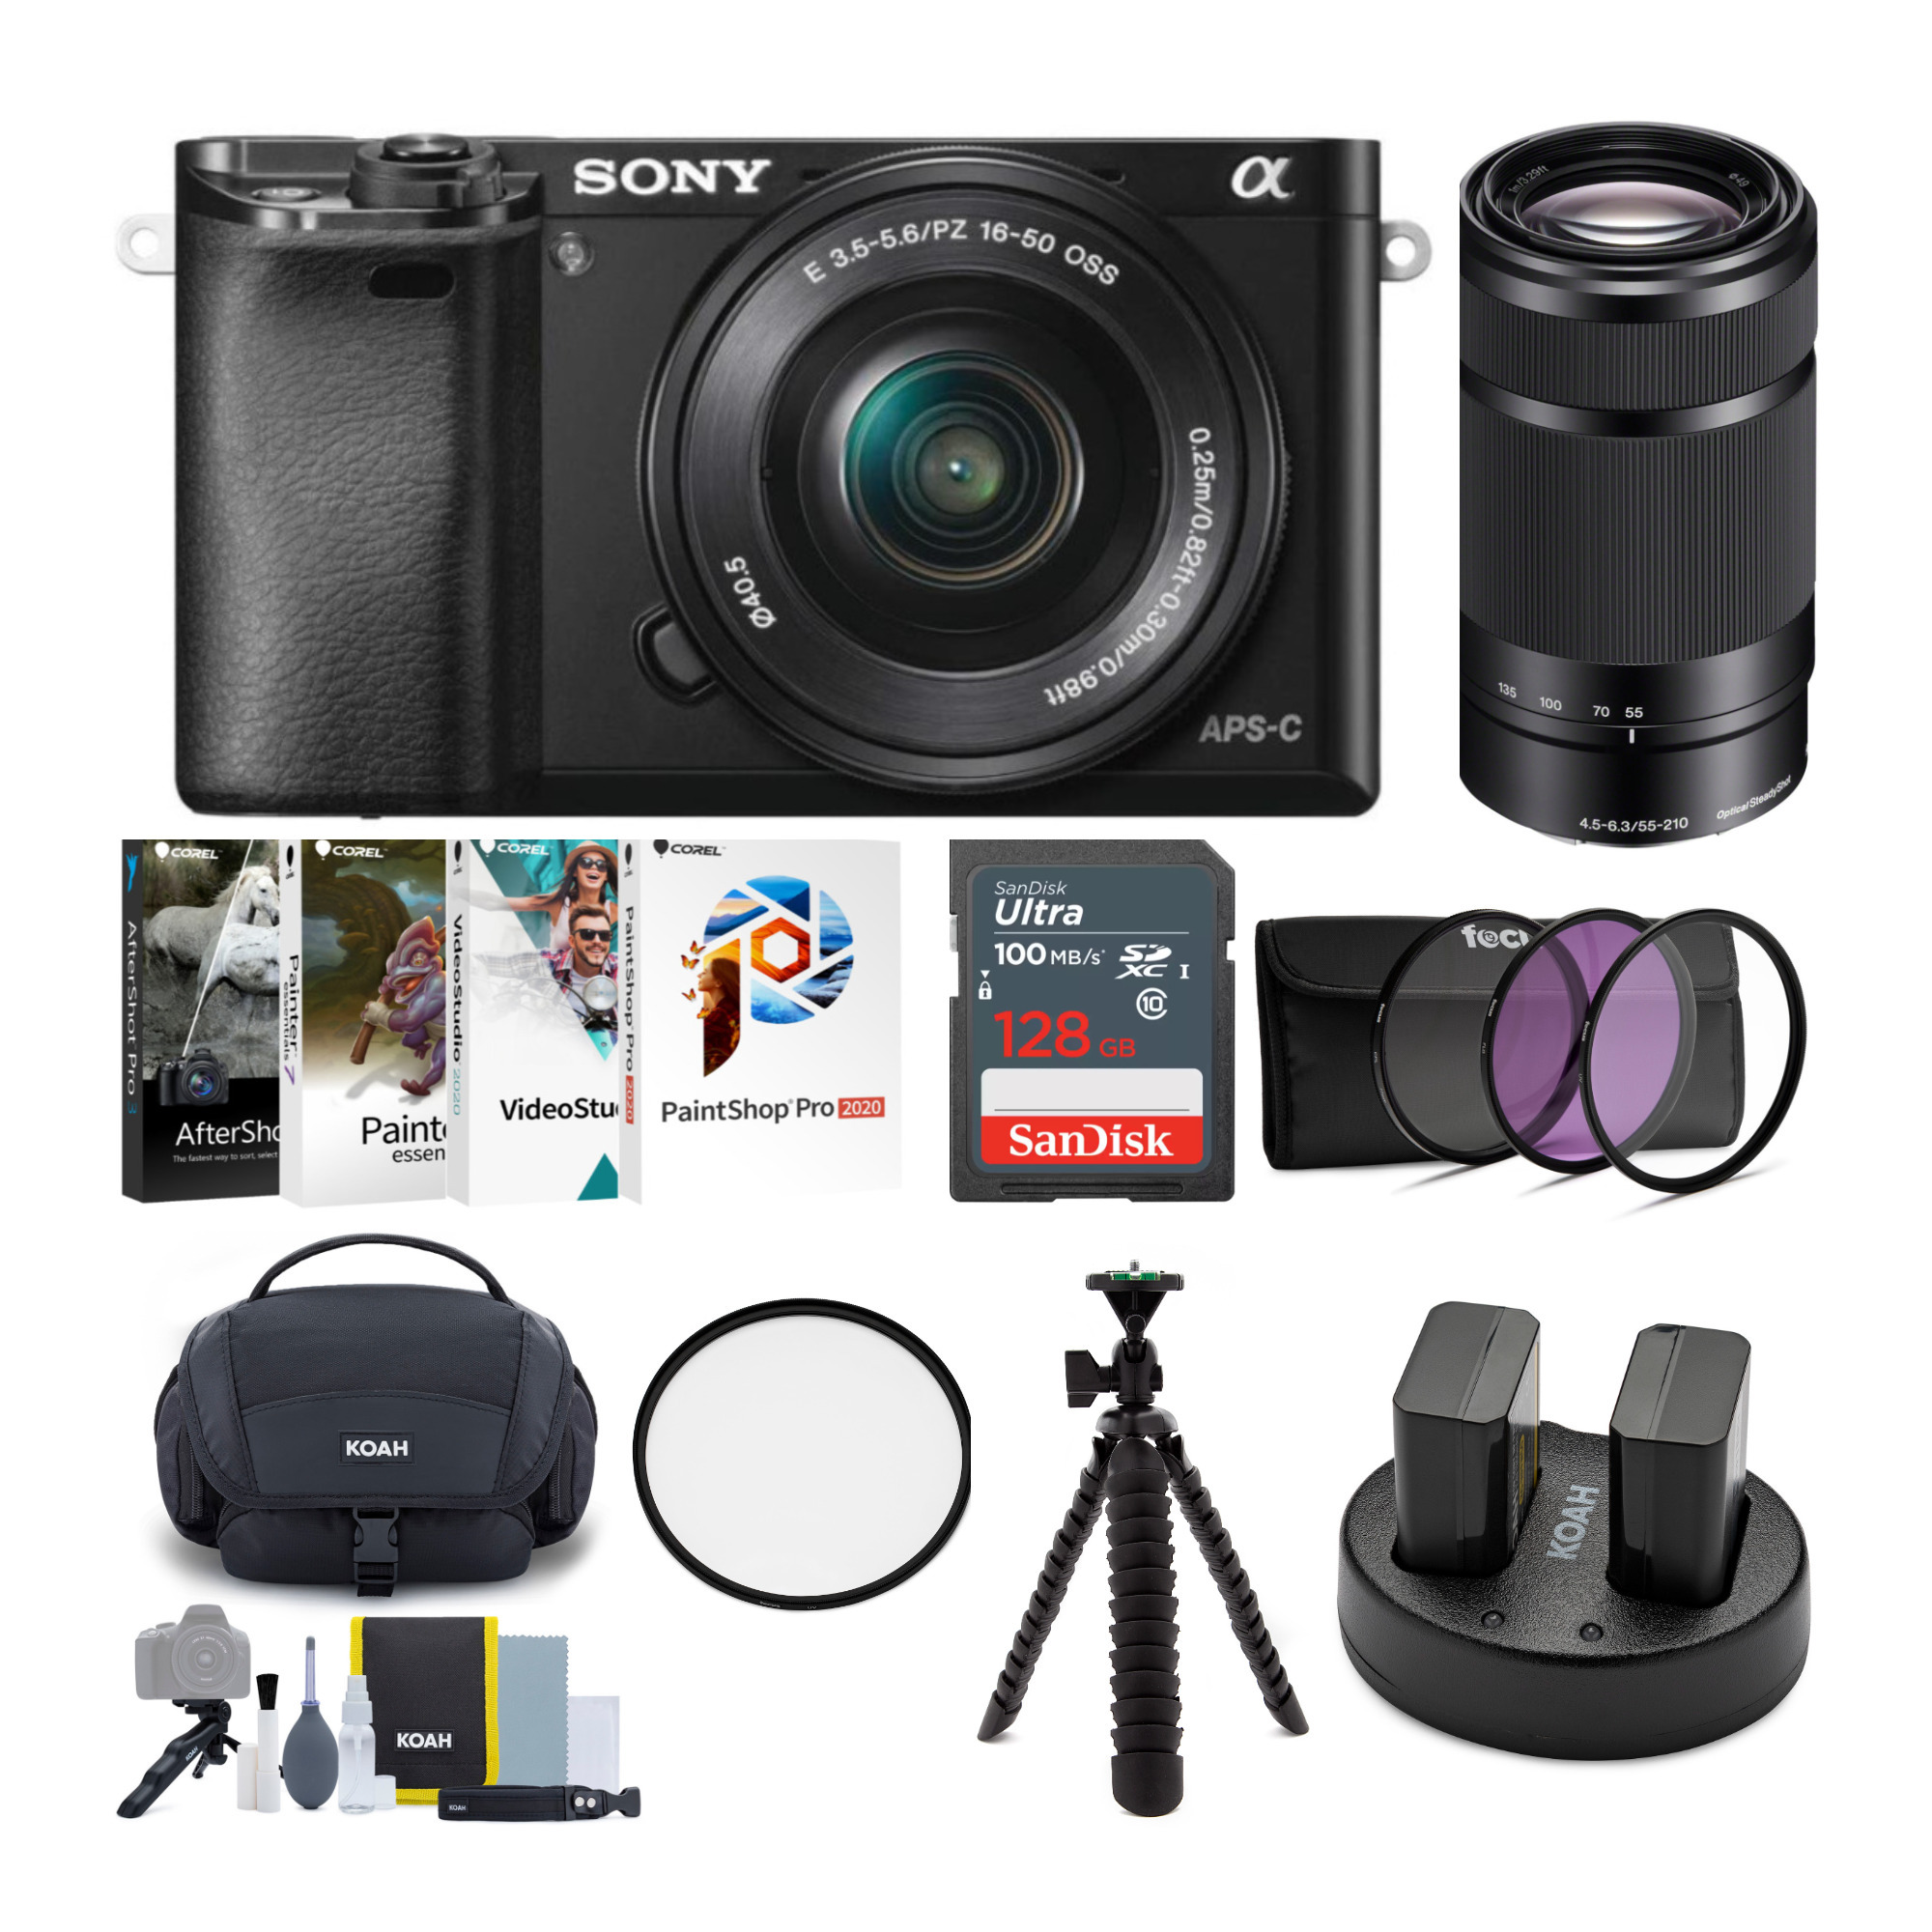 Sony Alpha a6000 Mirrorless Camera Bundle with 16-50mm and 55-210mm Lens, Tripod and Bag in Black